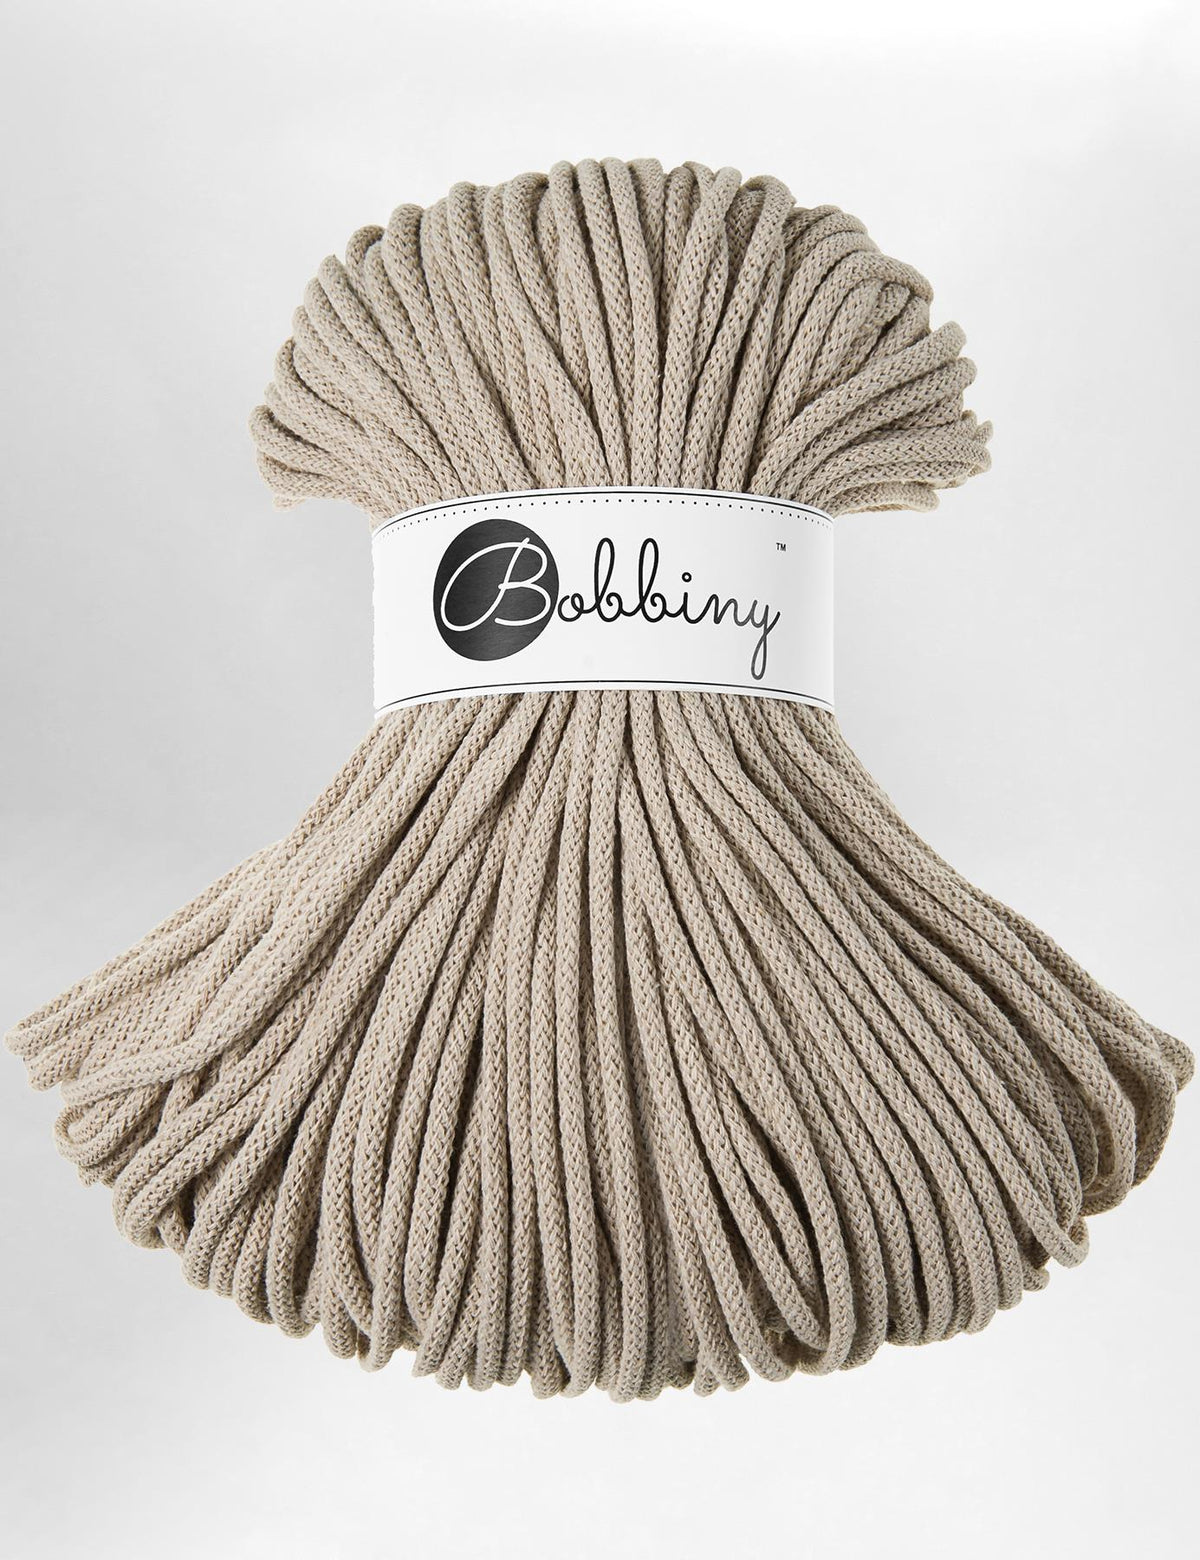 5mm Beige recycled cotton macrame cord by Bobbiny (100m)